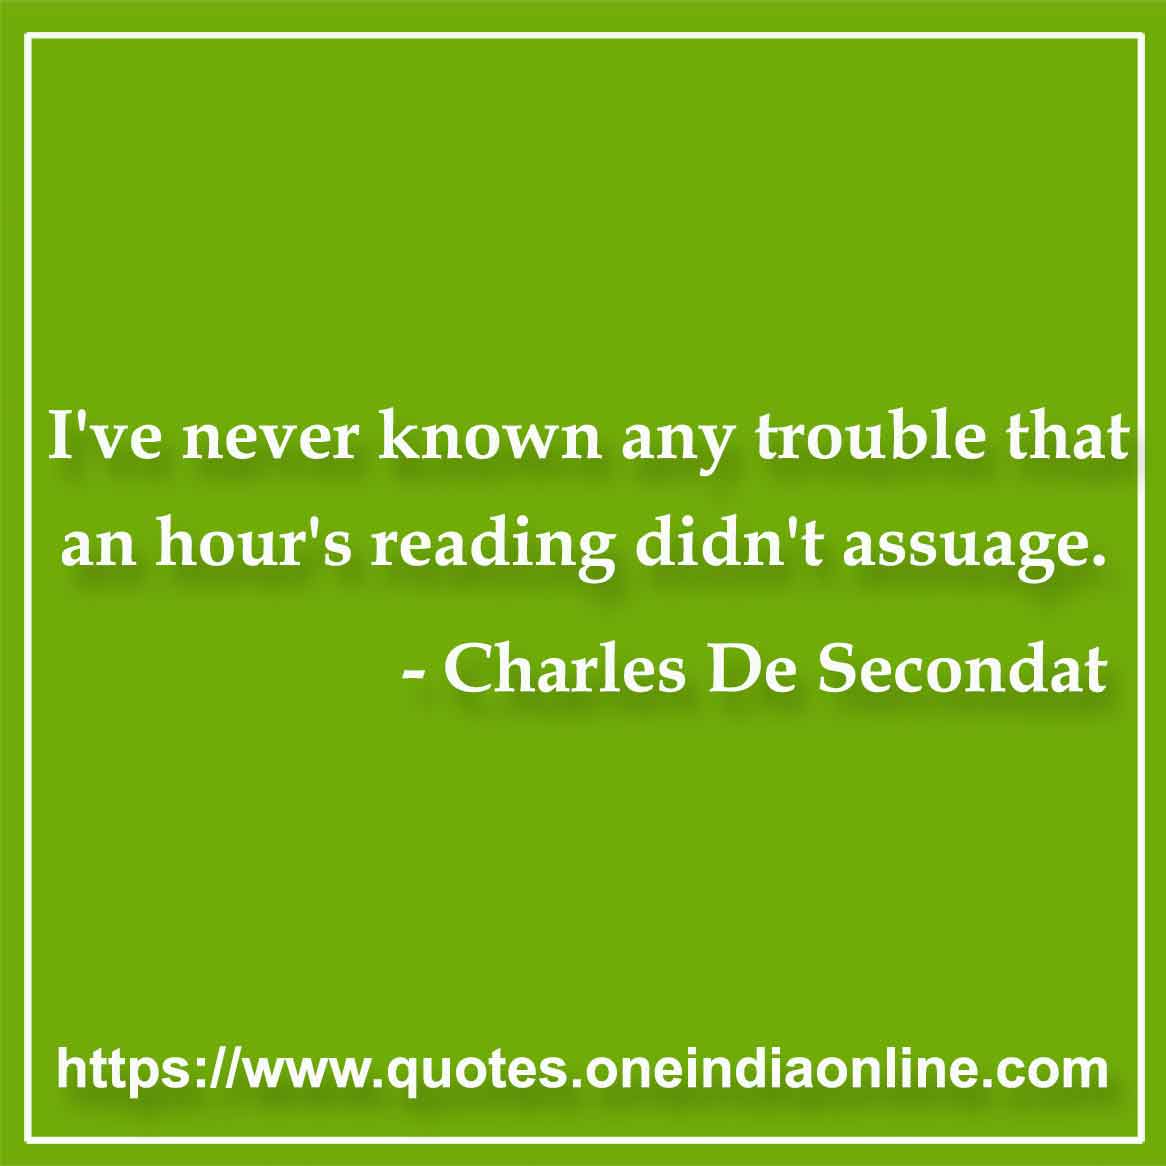 I've never known any trouble that an hour's reading didn't assuage.

- Charles De Secondat Quotes